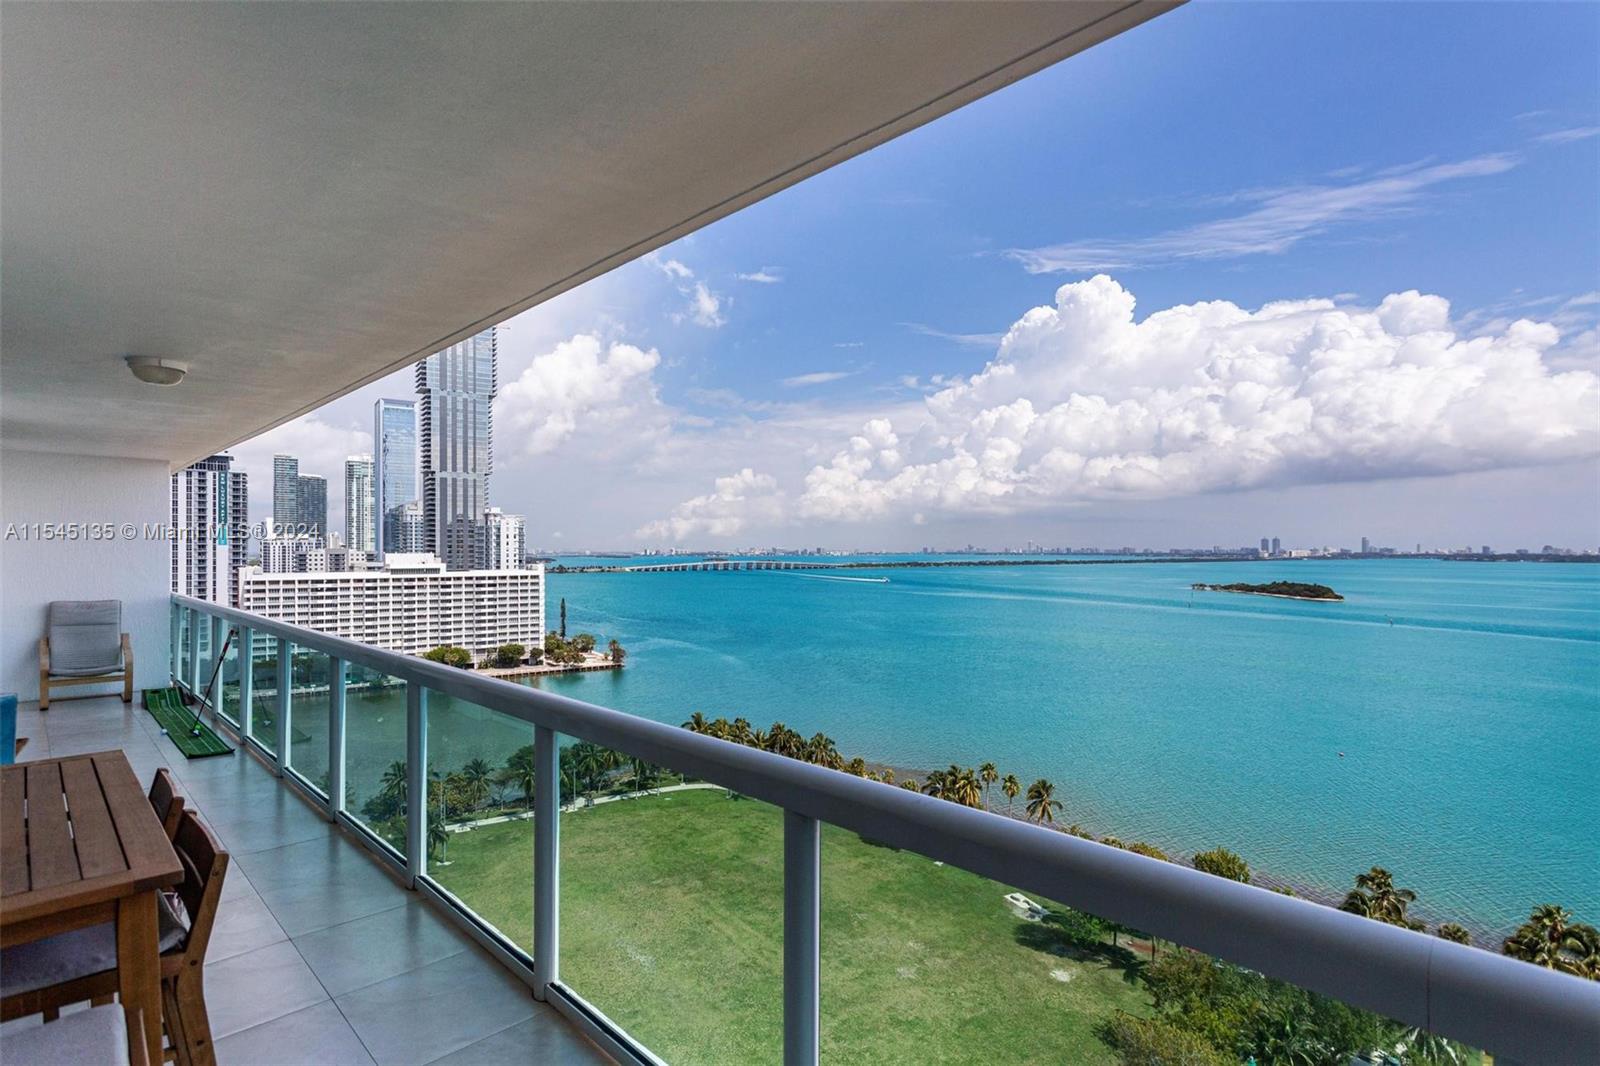 Fully furnished 2/2 with breathtaking bay views at 1800 Club condo near Downtown/Brickell Miami. Recently upgraded bathrooms, kitchen, and closets. Enjoy expansive direct East Ocean/Bay views from the living room, dining room, and bedrooms. The bedrooms are split, offering 1222 sq ft of AC space plus a 252 sq ft terrace. Tile floors throughout. This full-service building includes concierge, valet service, on-site management, pool, gym, spa, steam room, sauna, playroom, and more. HOA includes cable and internet. Conveniently located within walking distance to parks, cafes, nightlife, supermarkets, banks, and more. Only five minutes to South Beach, Downtown Miami, Brickell, American Airlines Arena, Performing Arts Center, Port of Miami, Health District, and easy access to all major highways.